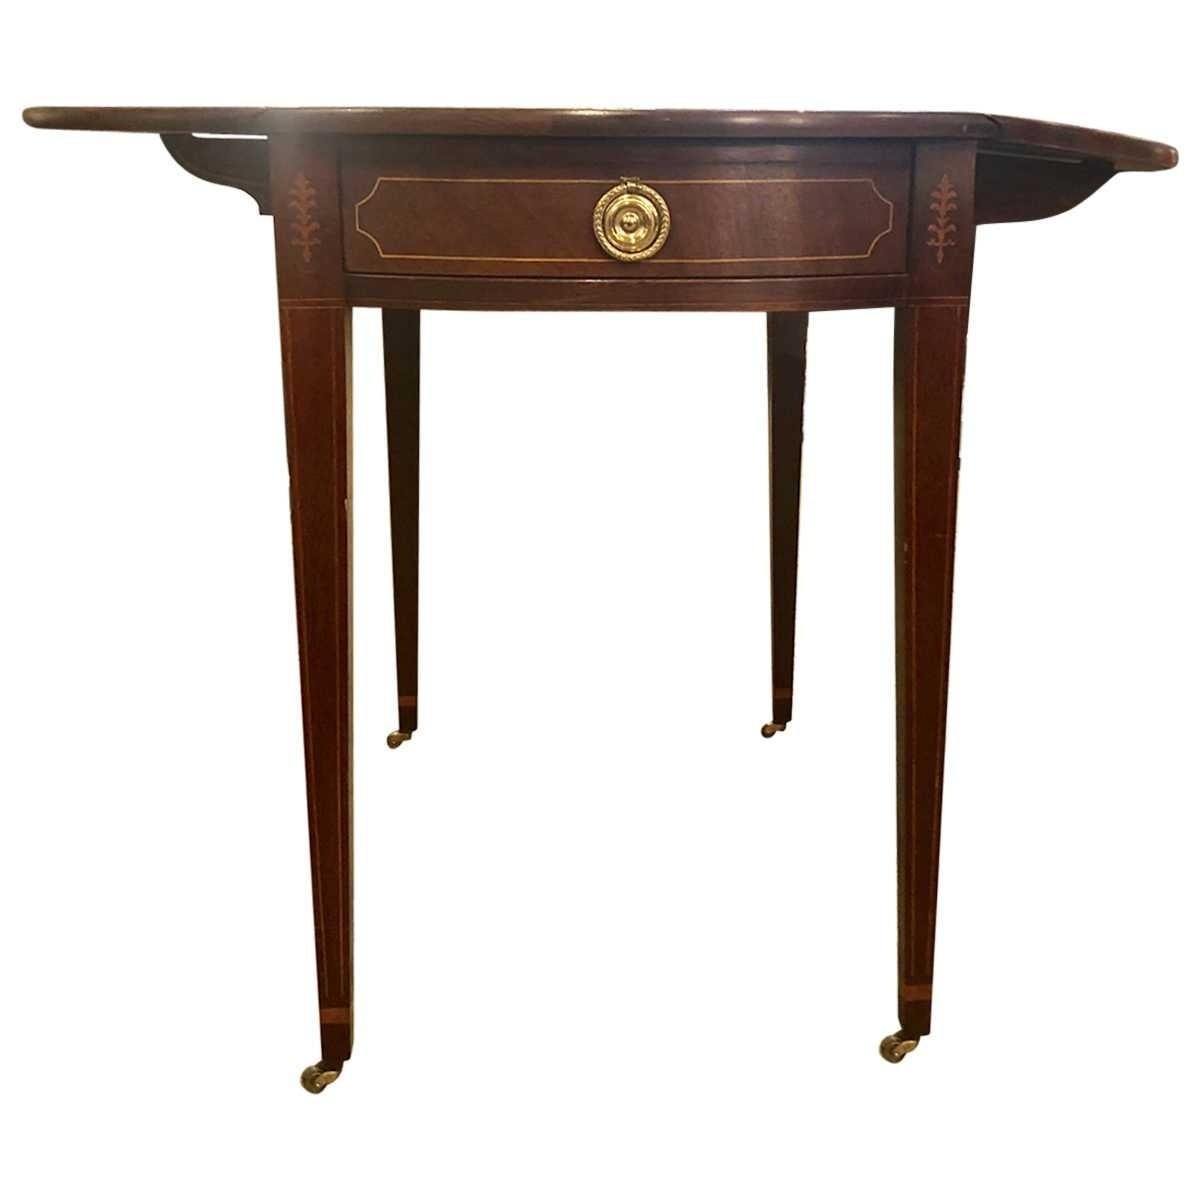 1940s baker mahogany drop-leaf table with brass ring pulls on the drawer. Materials: Mahogany, polished brass
Dimensions:
Width 20